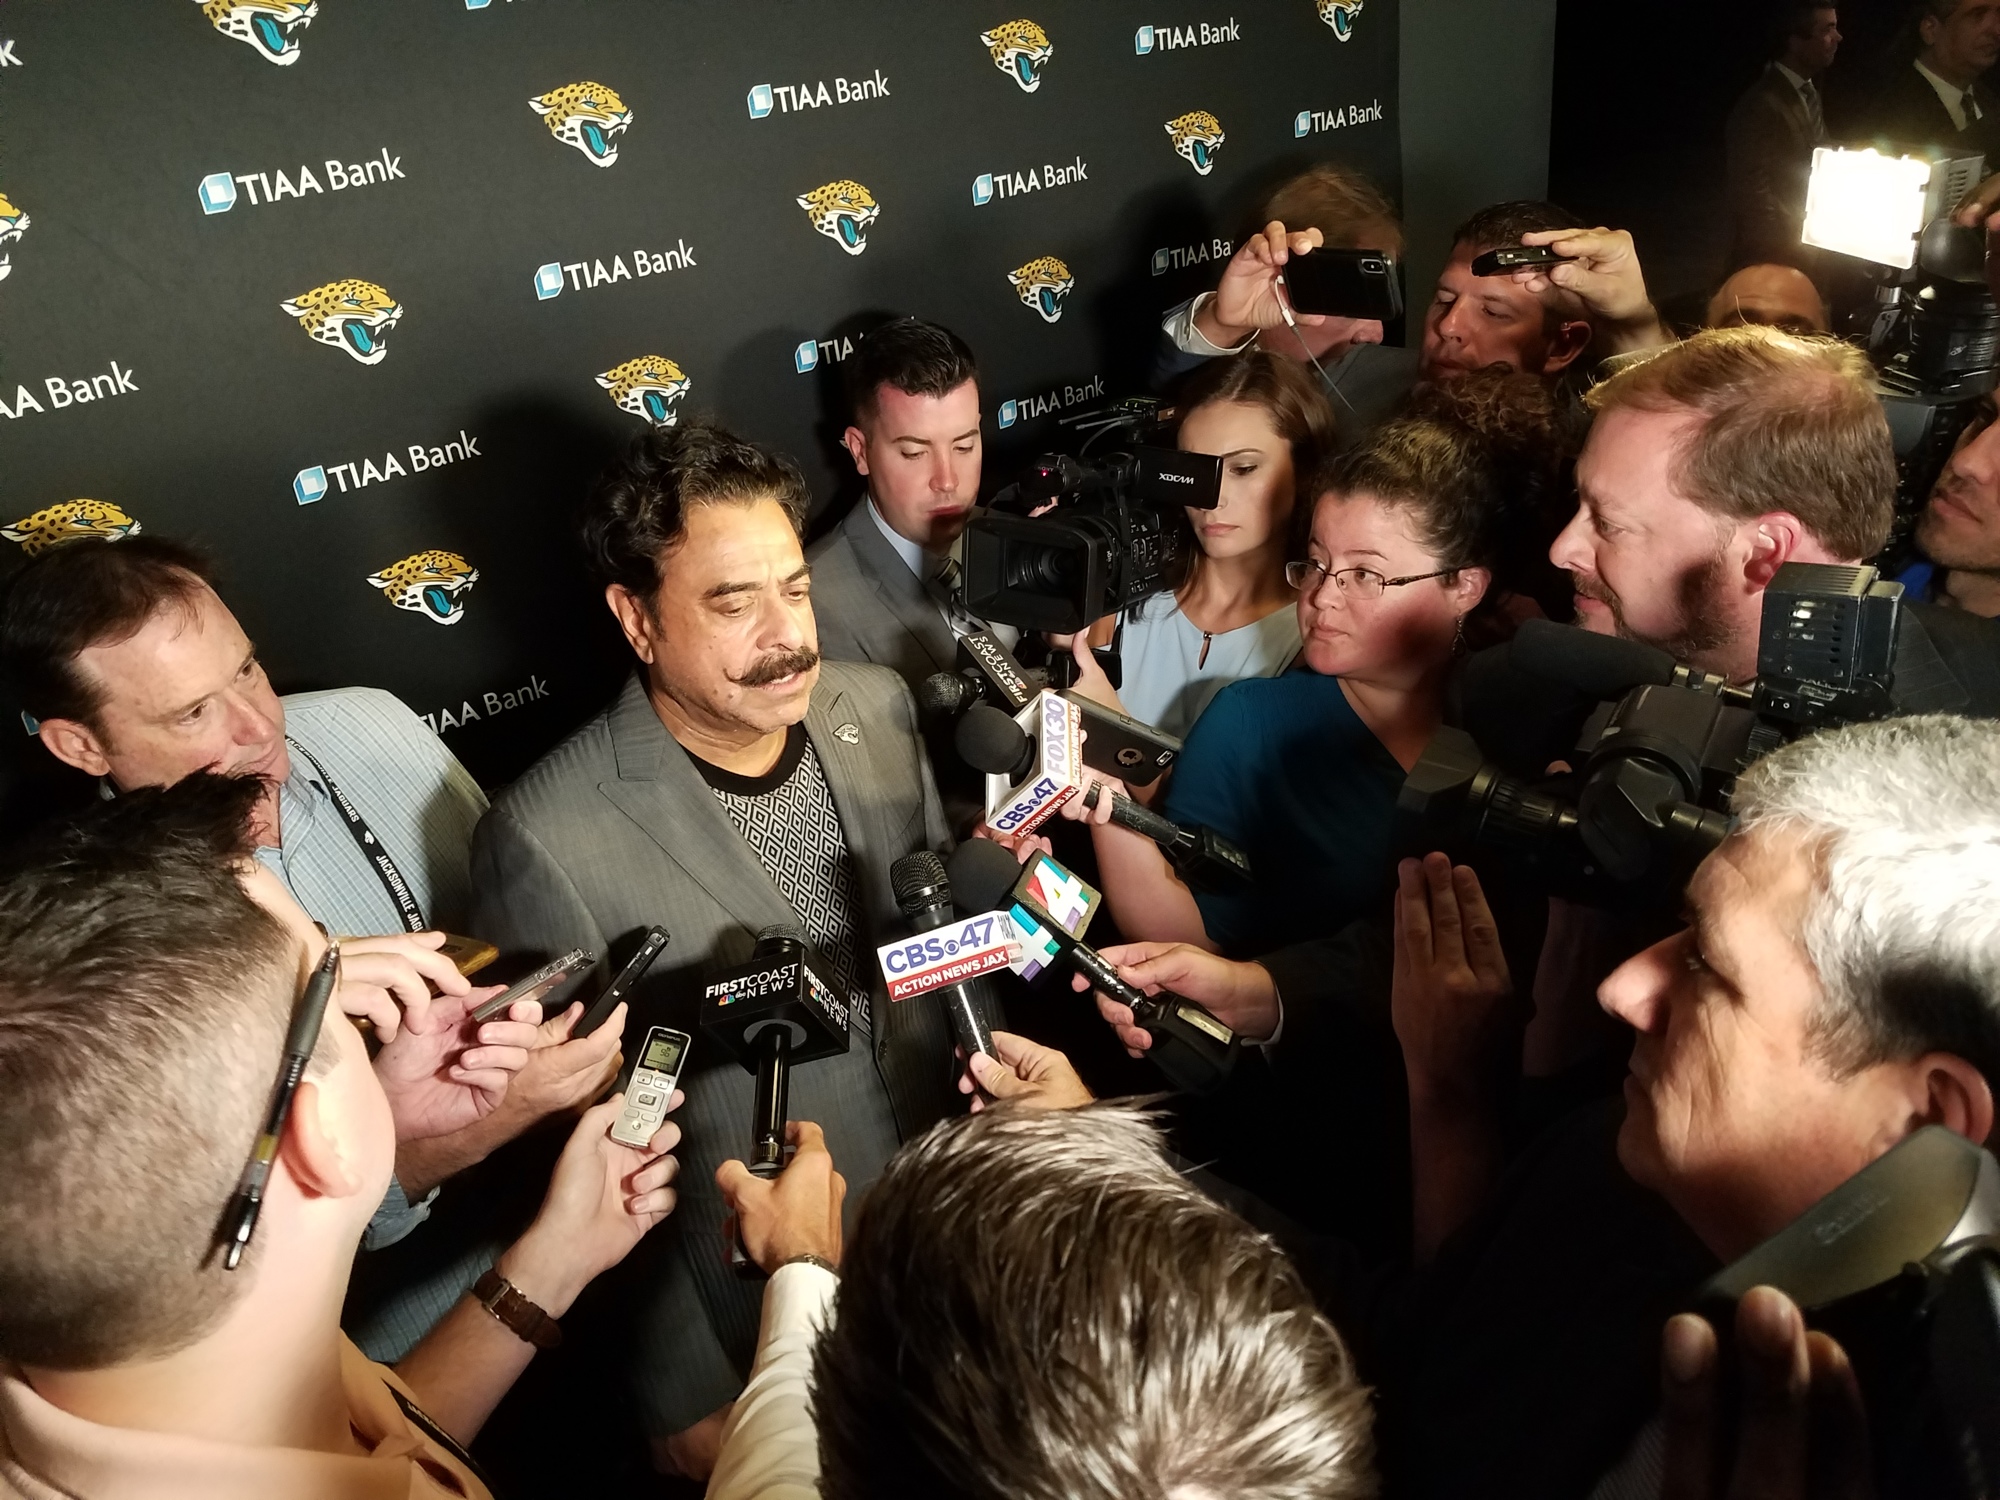 “The city has to grow and we have to have energy around the stadium and in the stadium,” Jaguars owner Shad Khan said as he met with reporters Thursday after the State of the Franchise event.